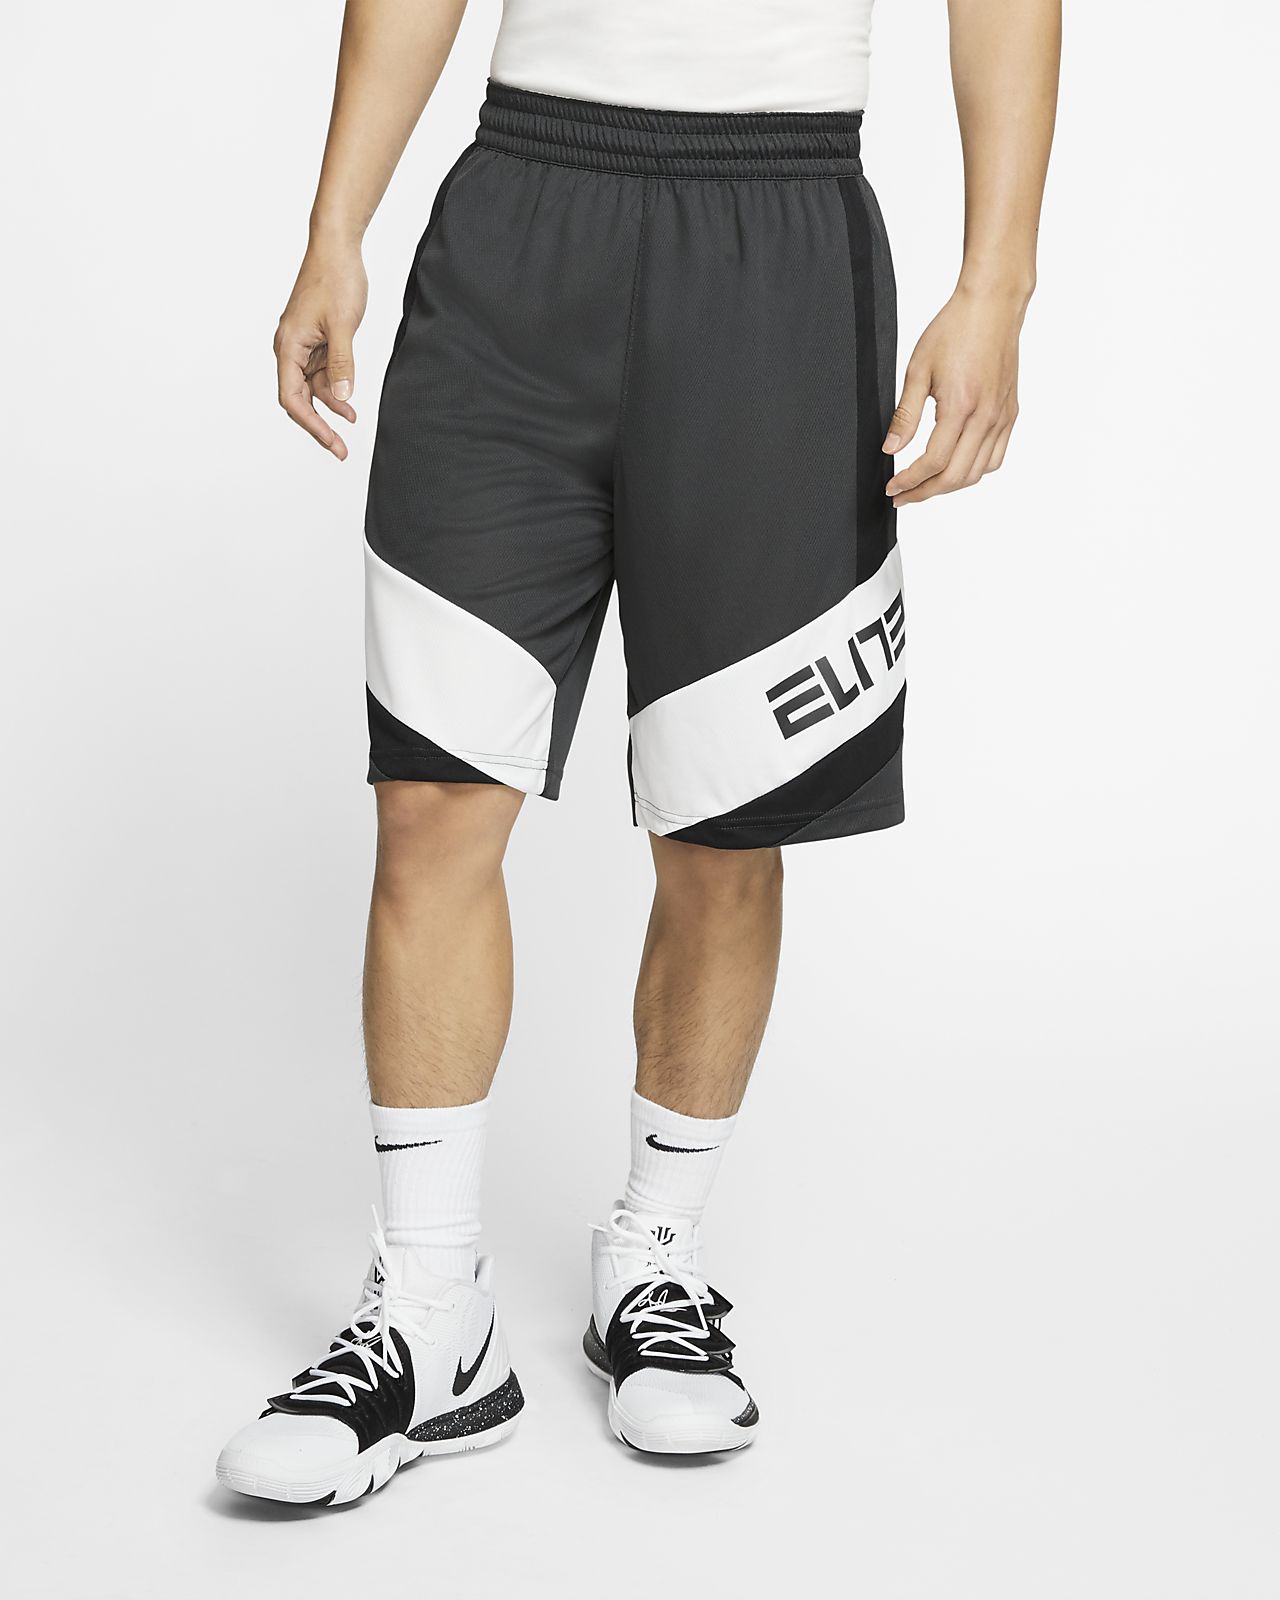 fitted basketball shorts